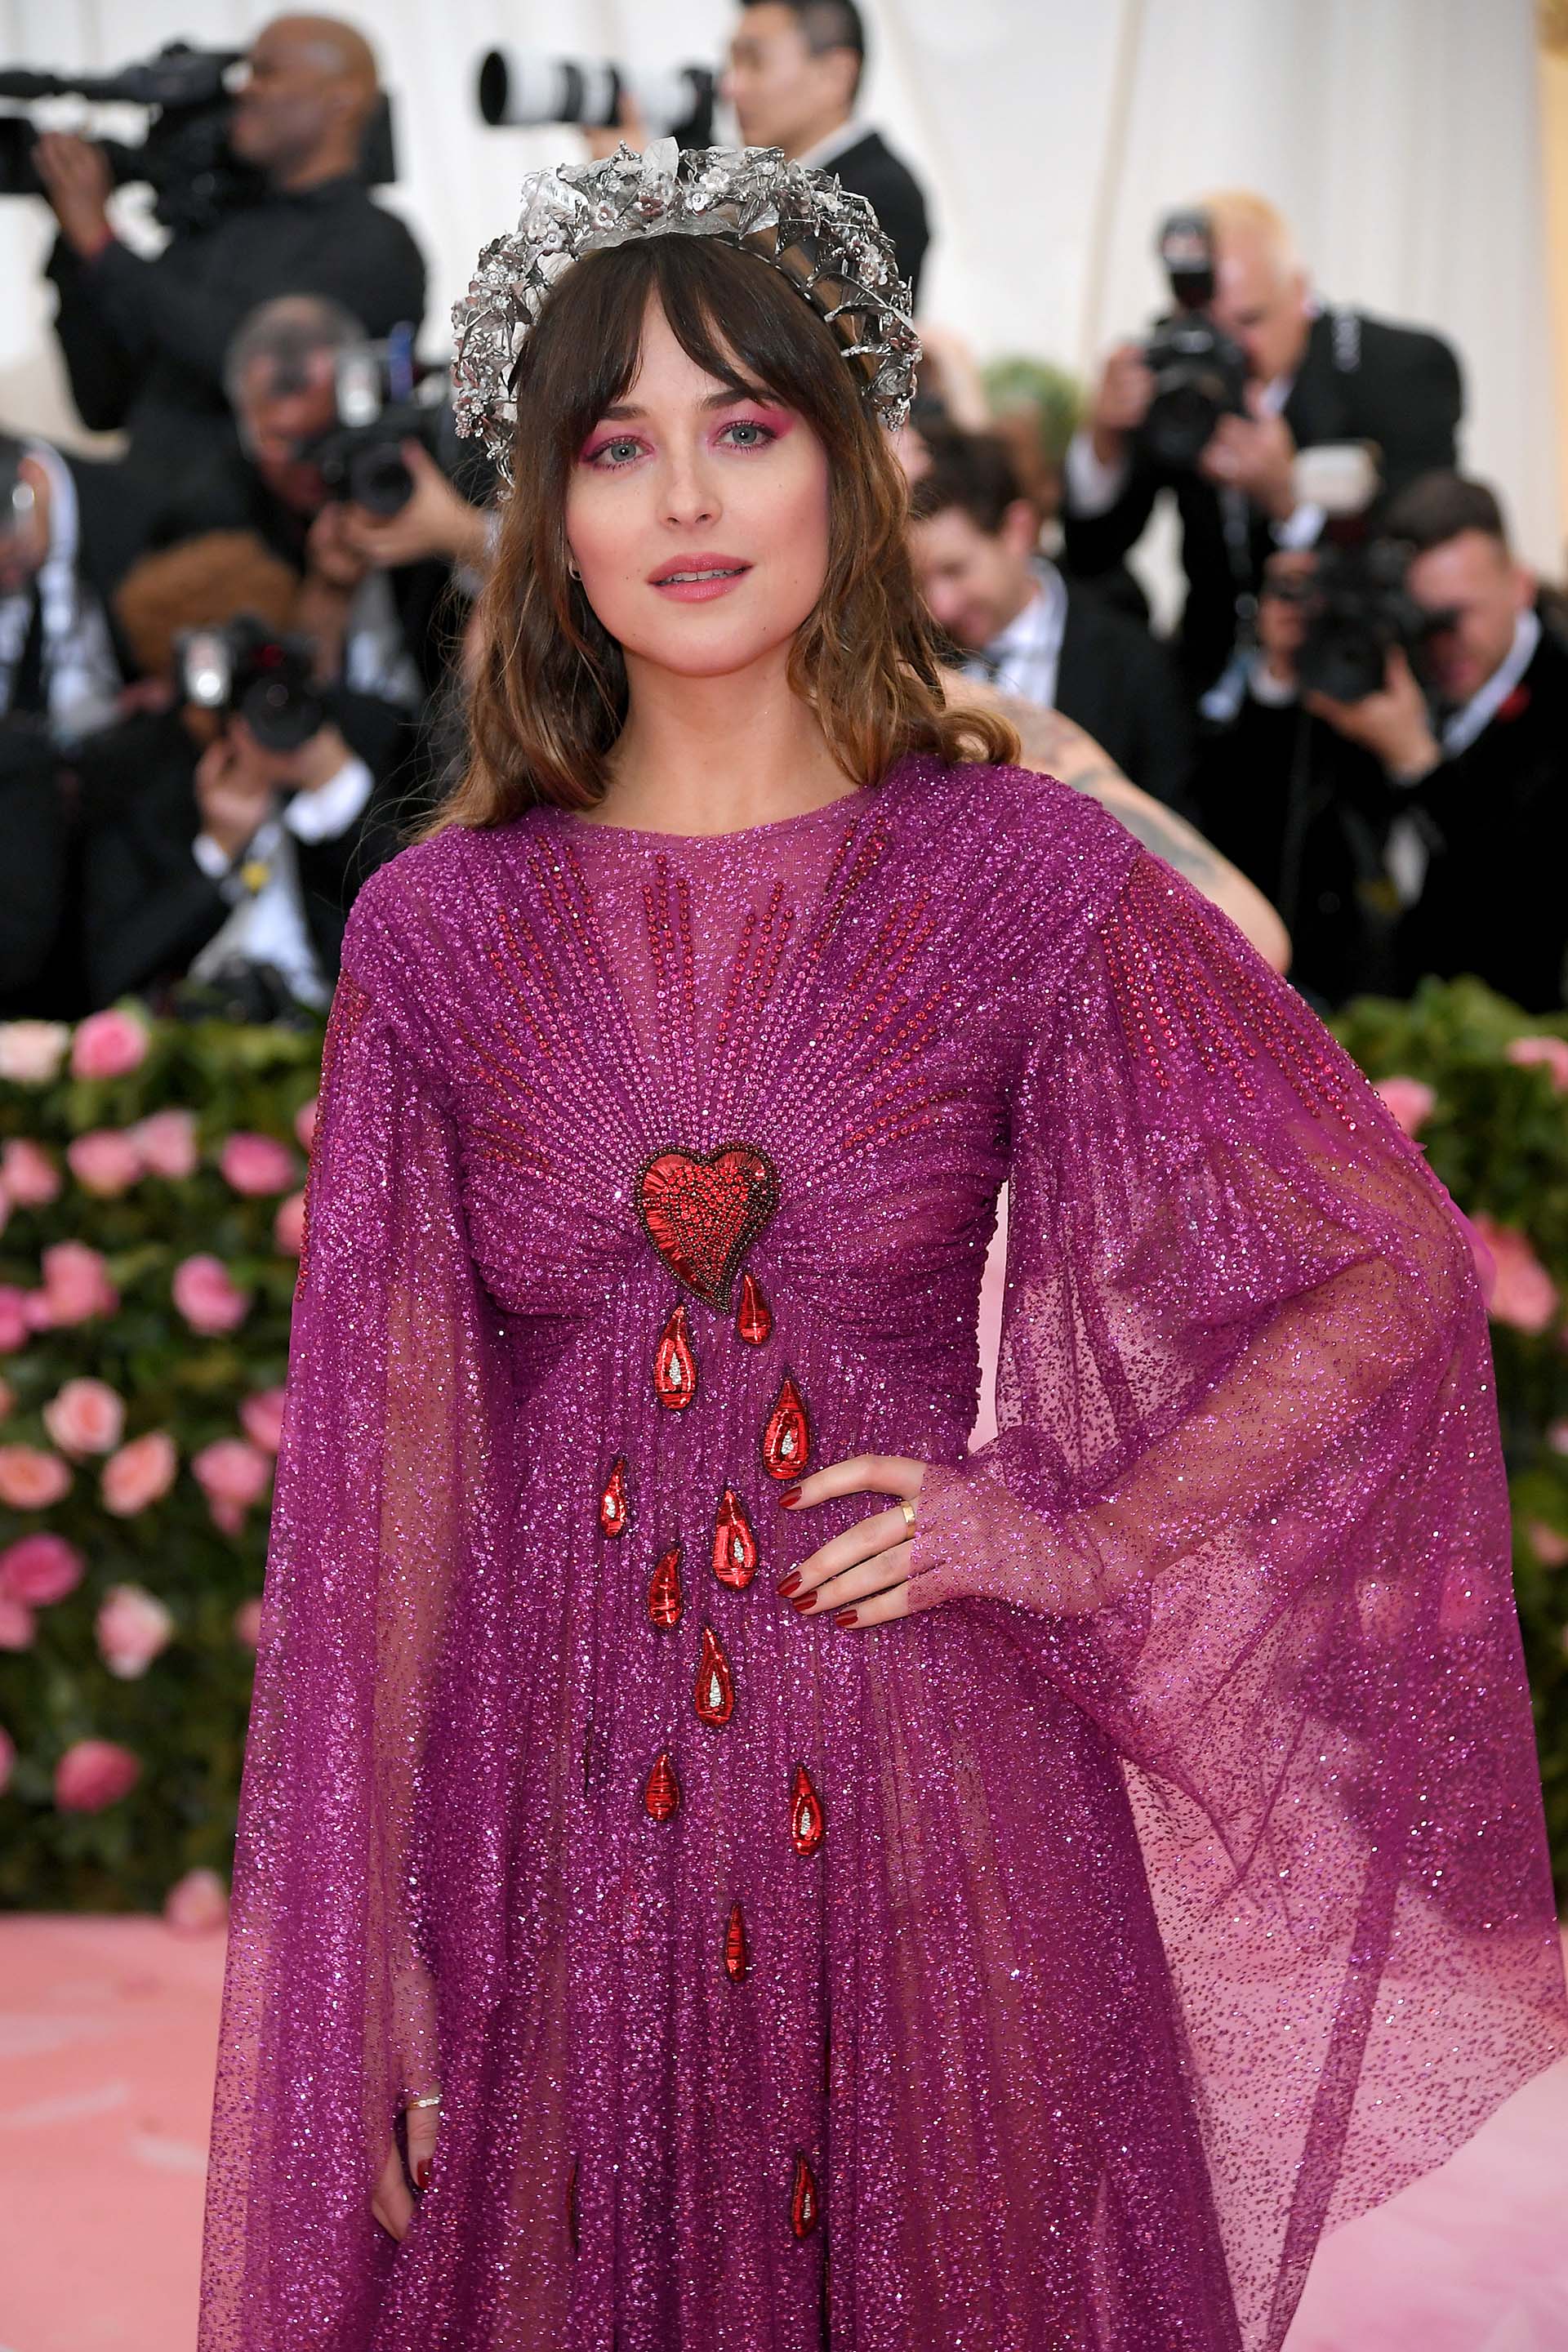 NEW YORK, NEW YORK - MAY 06: Dakota Johnson attends The 2019 Met Gala Celebrating Camp: Notes on Fashion at Metropolitan Museum of Art on May 06, 2019 in New York City. Neilson Barnard/Getty Images/AFP